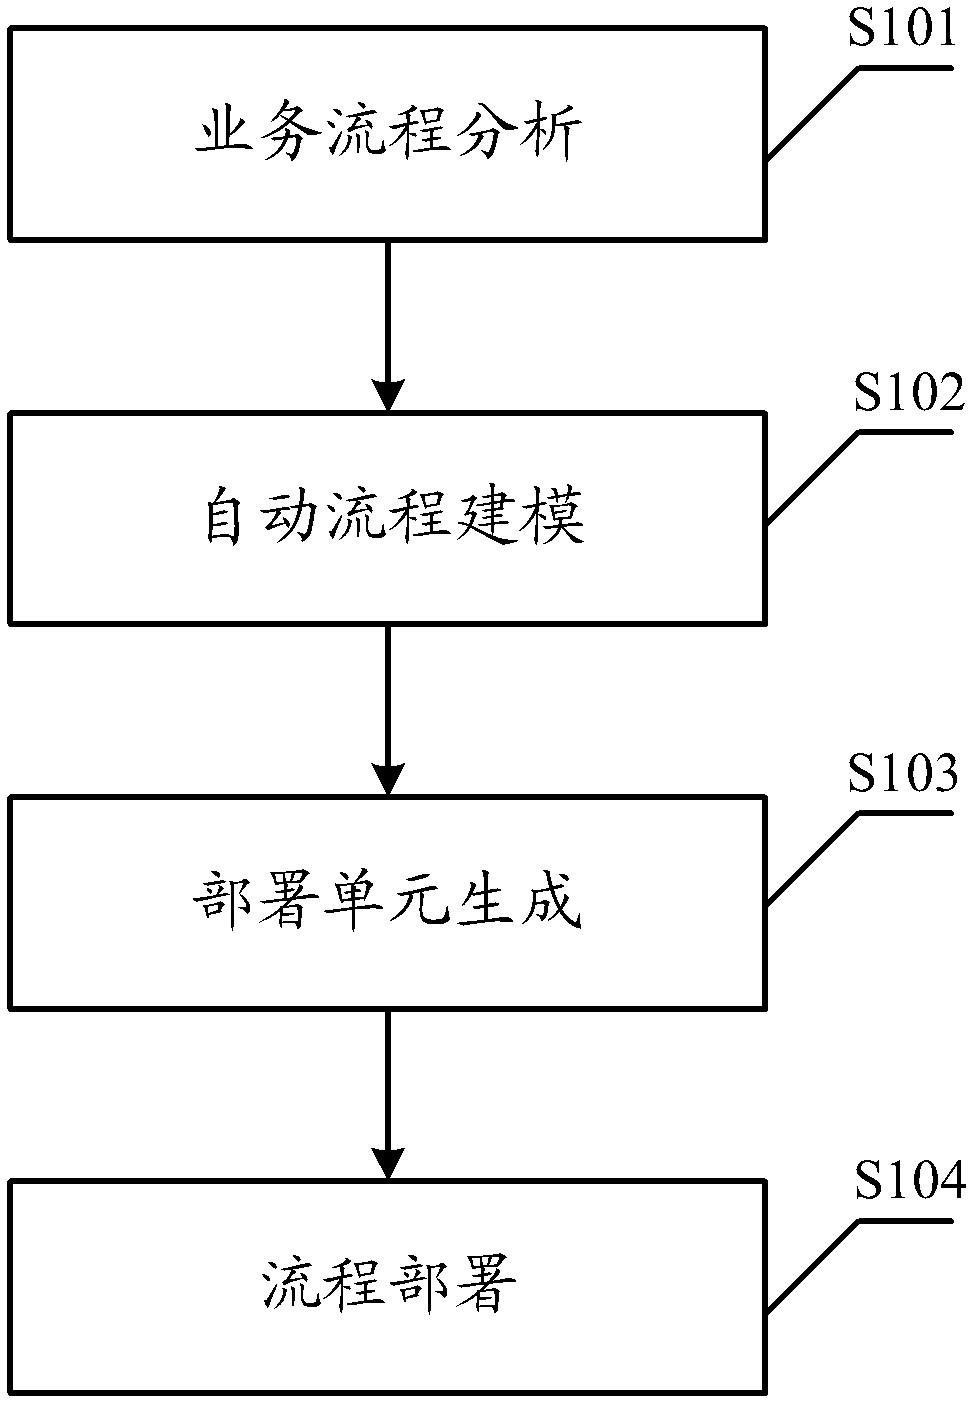 A Business Processing Execution Language Process Deployment Method